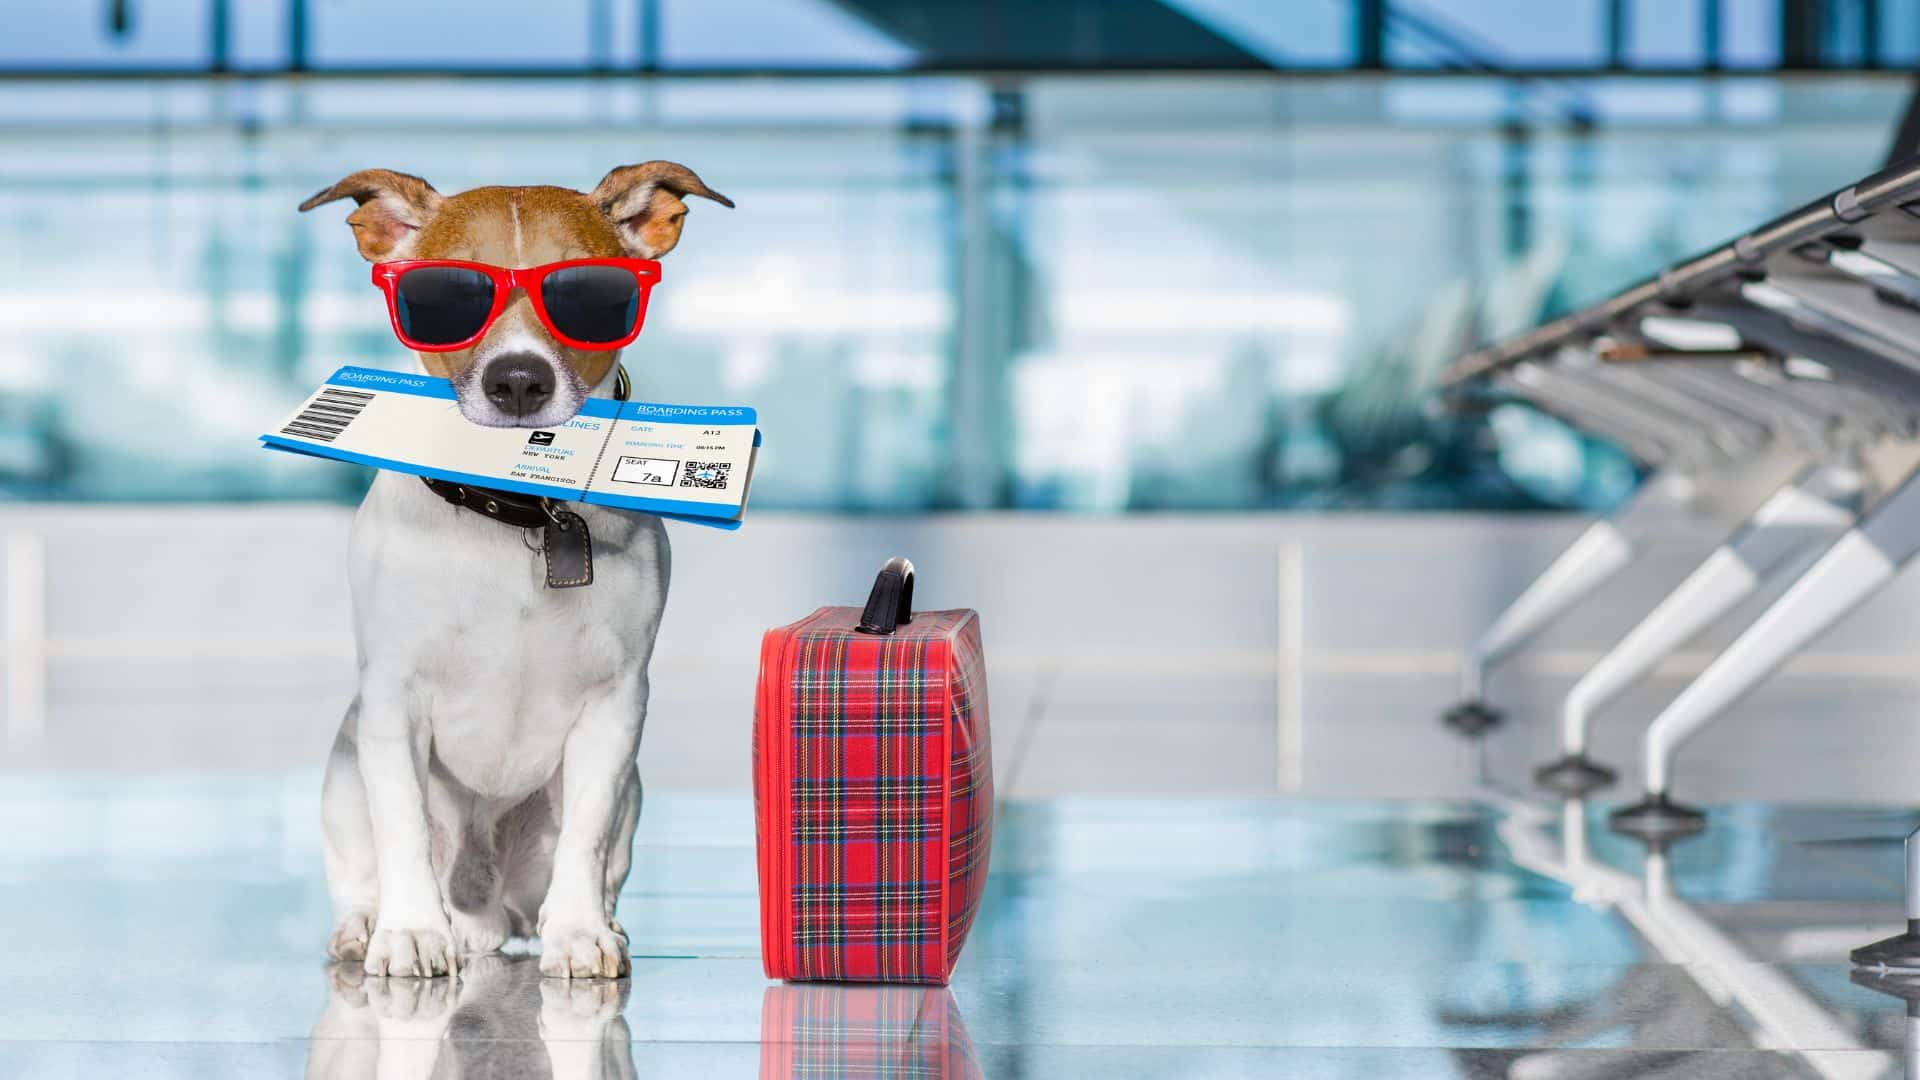 Fewer airlines are pet friendly and do not allow guinea pigs to flight